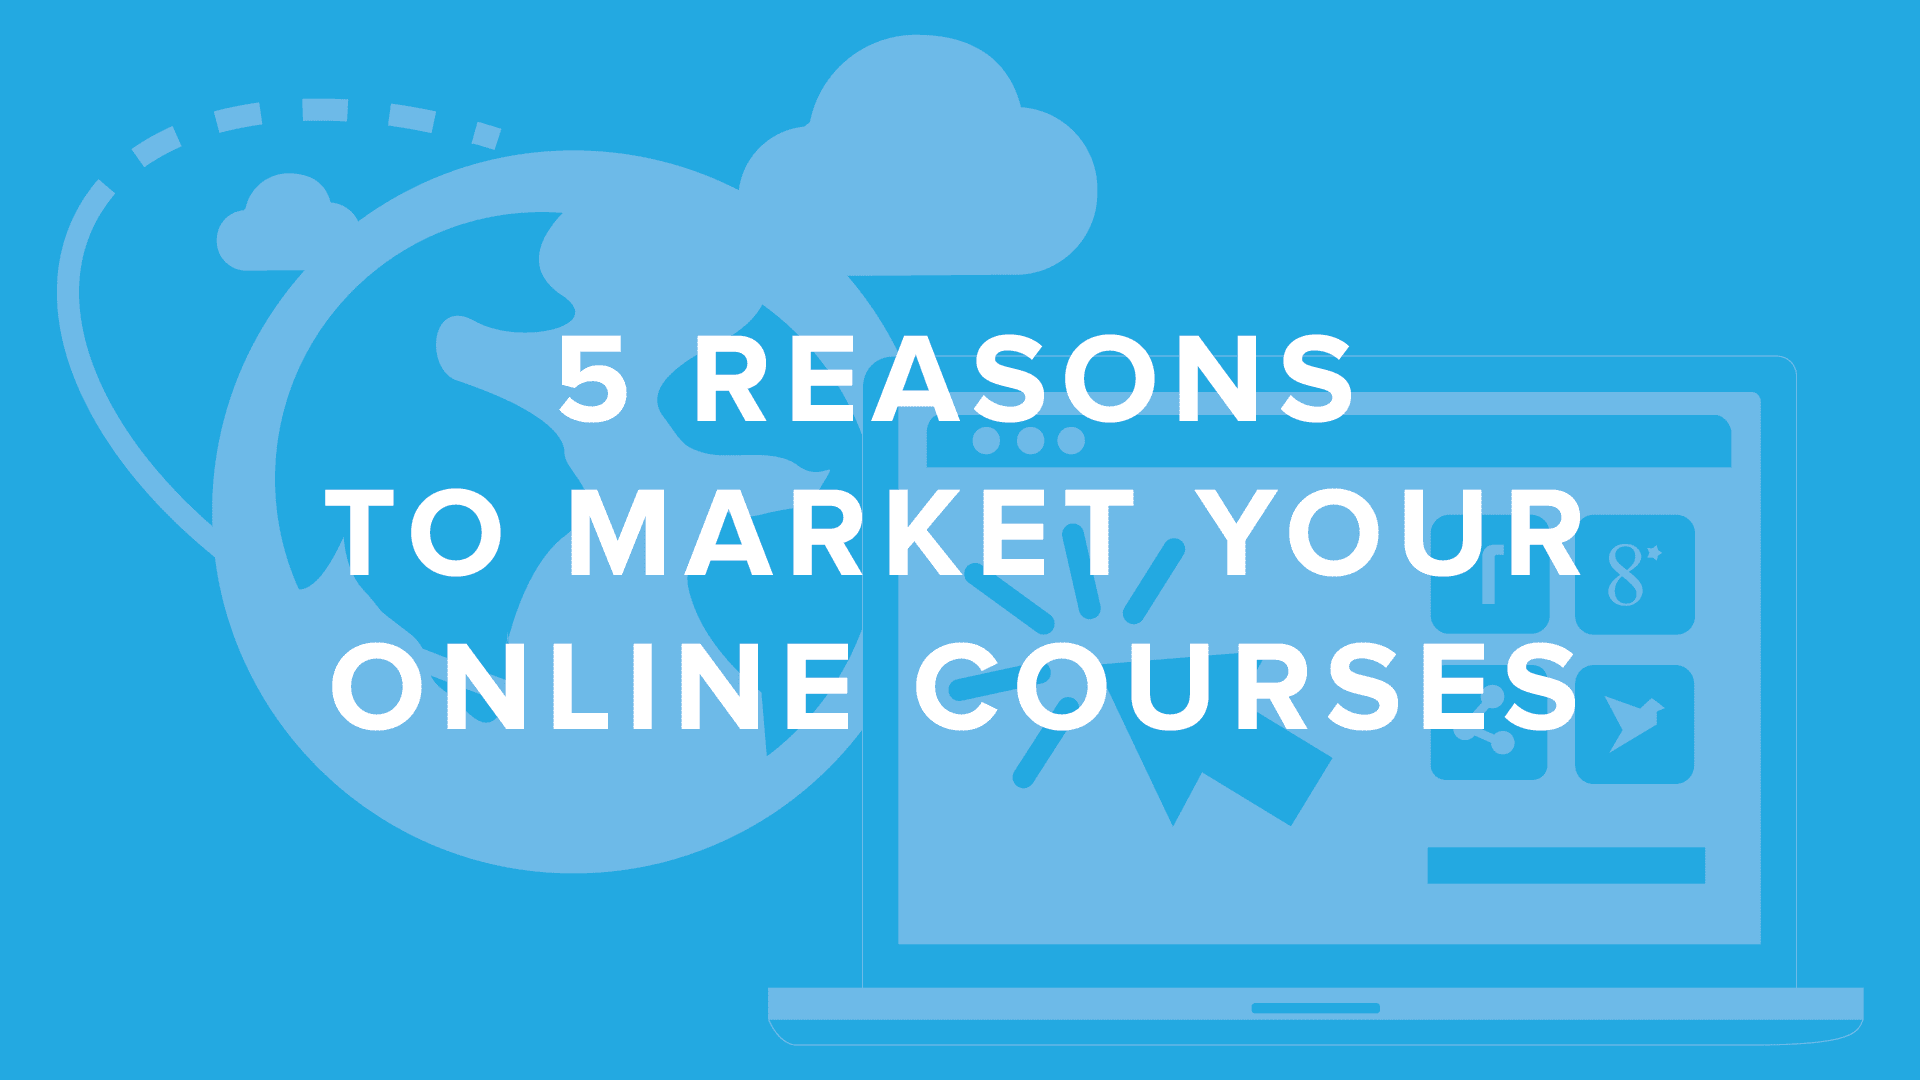 DigitalChalk: 5 Reasons You Should Be Marketing Your Online Courses